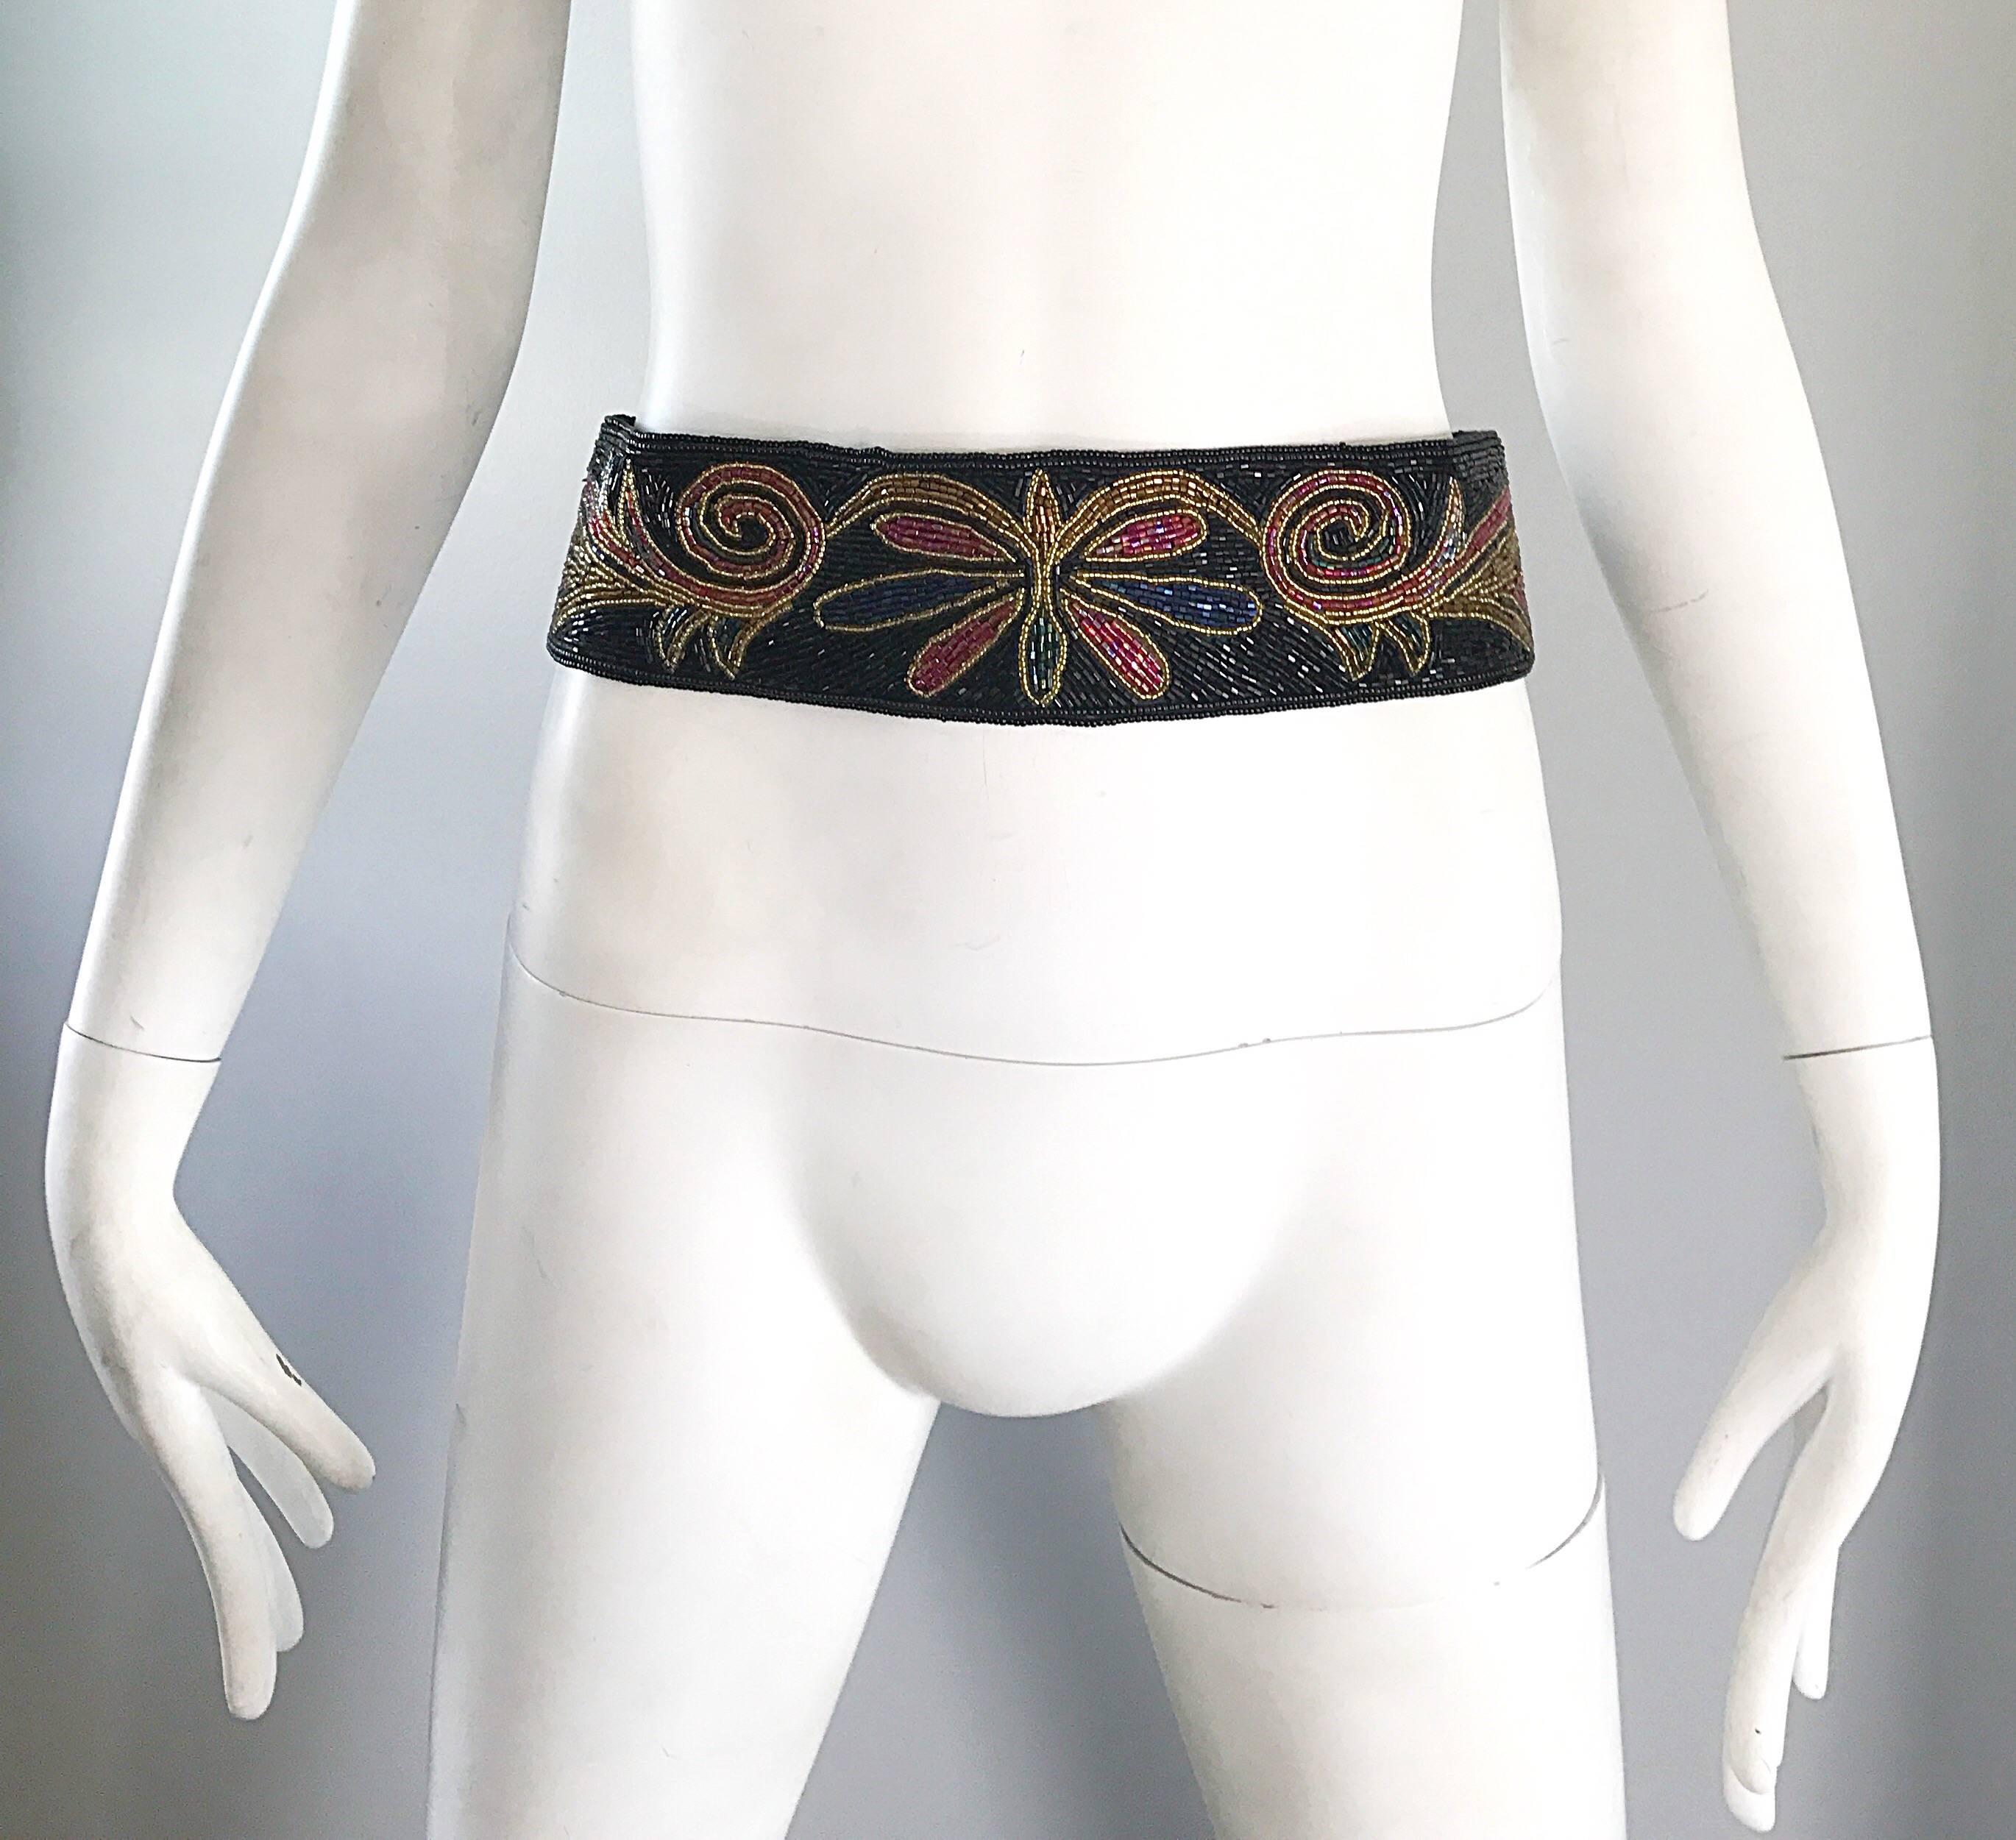 Fabulous 1980s fully beaded 'butterfly' belt! Features thousands of hand-sewn seed beads, with a butterfly motif in the front center. Vibrant colors of red, pink, blue, green and gold throughout. Hidden Velcro closure in the back makes this beauty